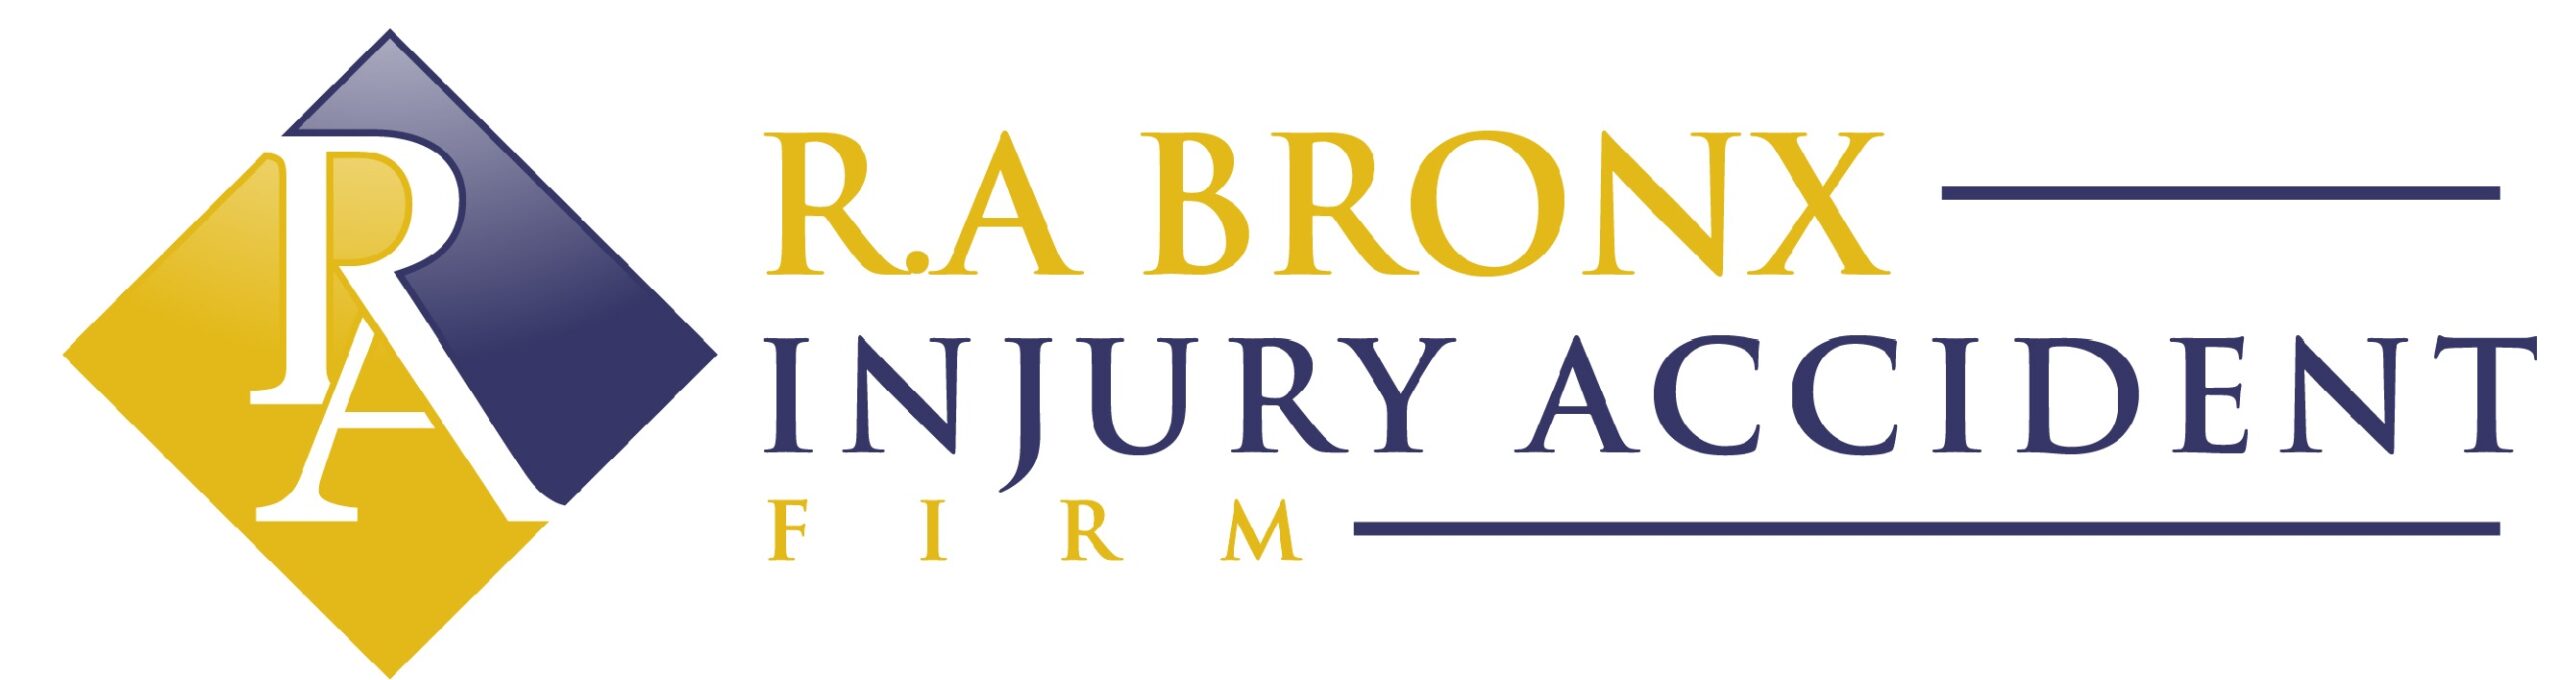 R.A Bronx Injury Accident Firm | NYC Car Accident Law